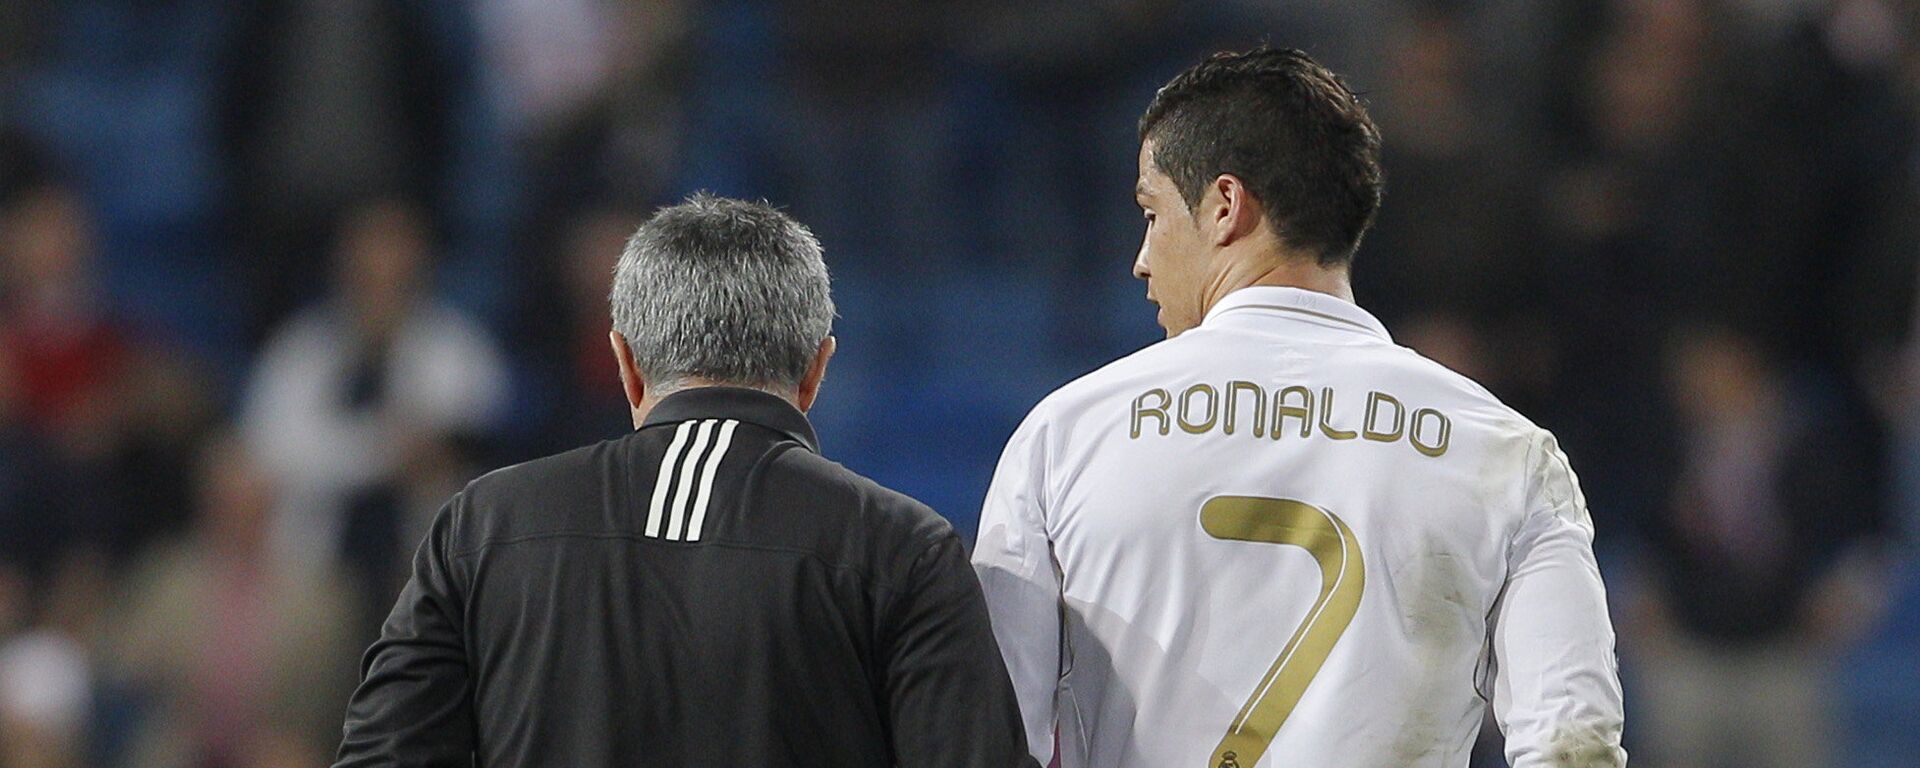 Real Madrid's coach Jose Mourinho from Portugal embraces Cristiano Ronaldo from Portugal after a Champions League round of 16, second leg soccer match against CSKA Moscow's at the Santiago Bernabeu Stadium, in Madrid, Wednesday, March 14, 2012 - اسپوتنیک افغانستان  , 1920, 11.06.2021